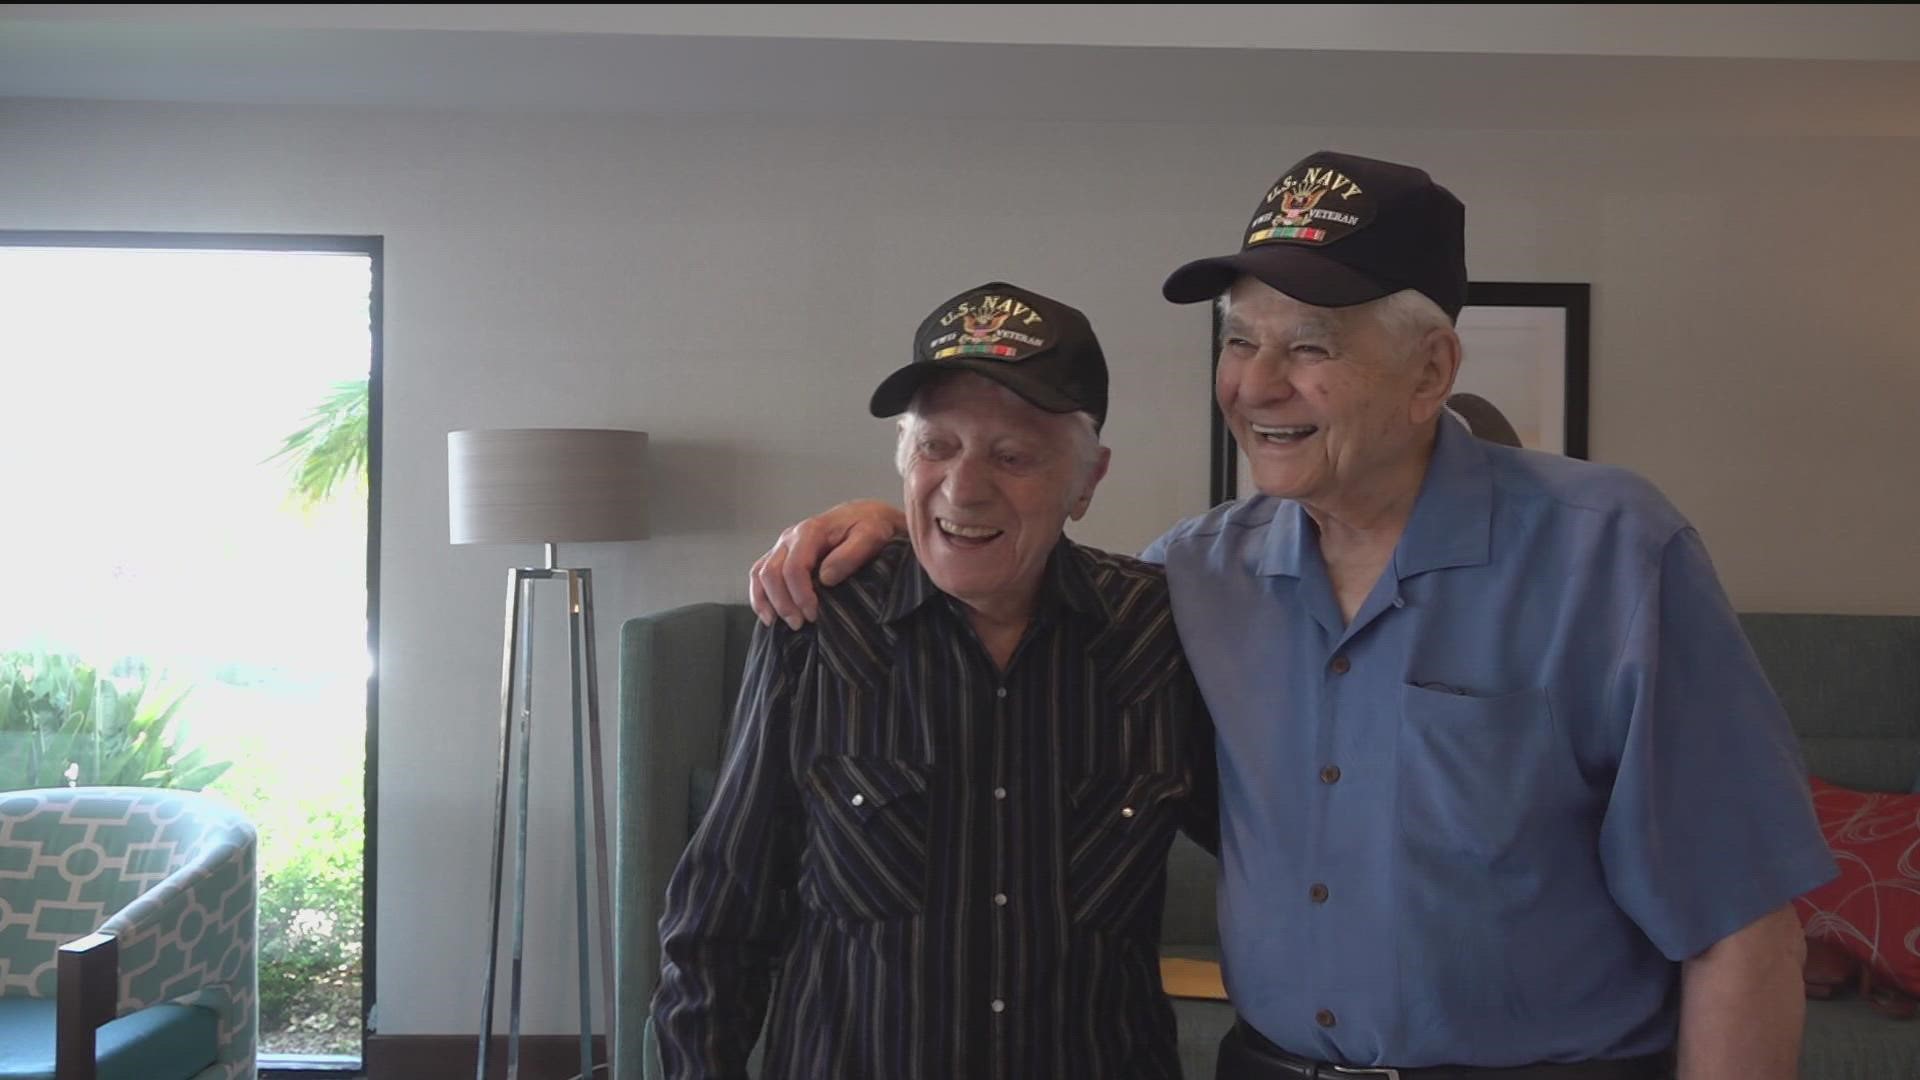 Two WWII veterans who became best friends while training in Camp Pendleton reunite after not knowing what happened to them while in combat.